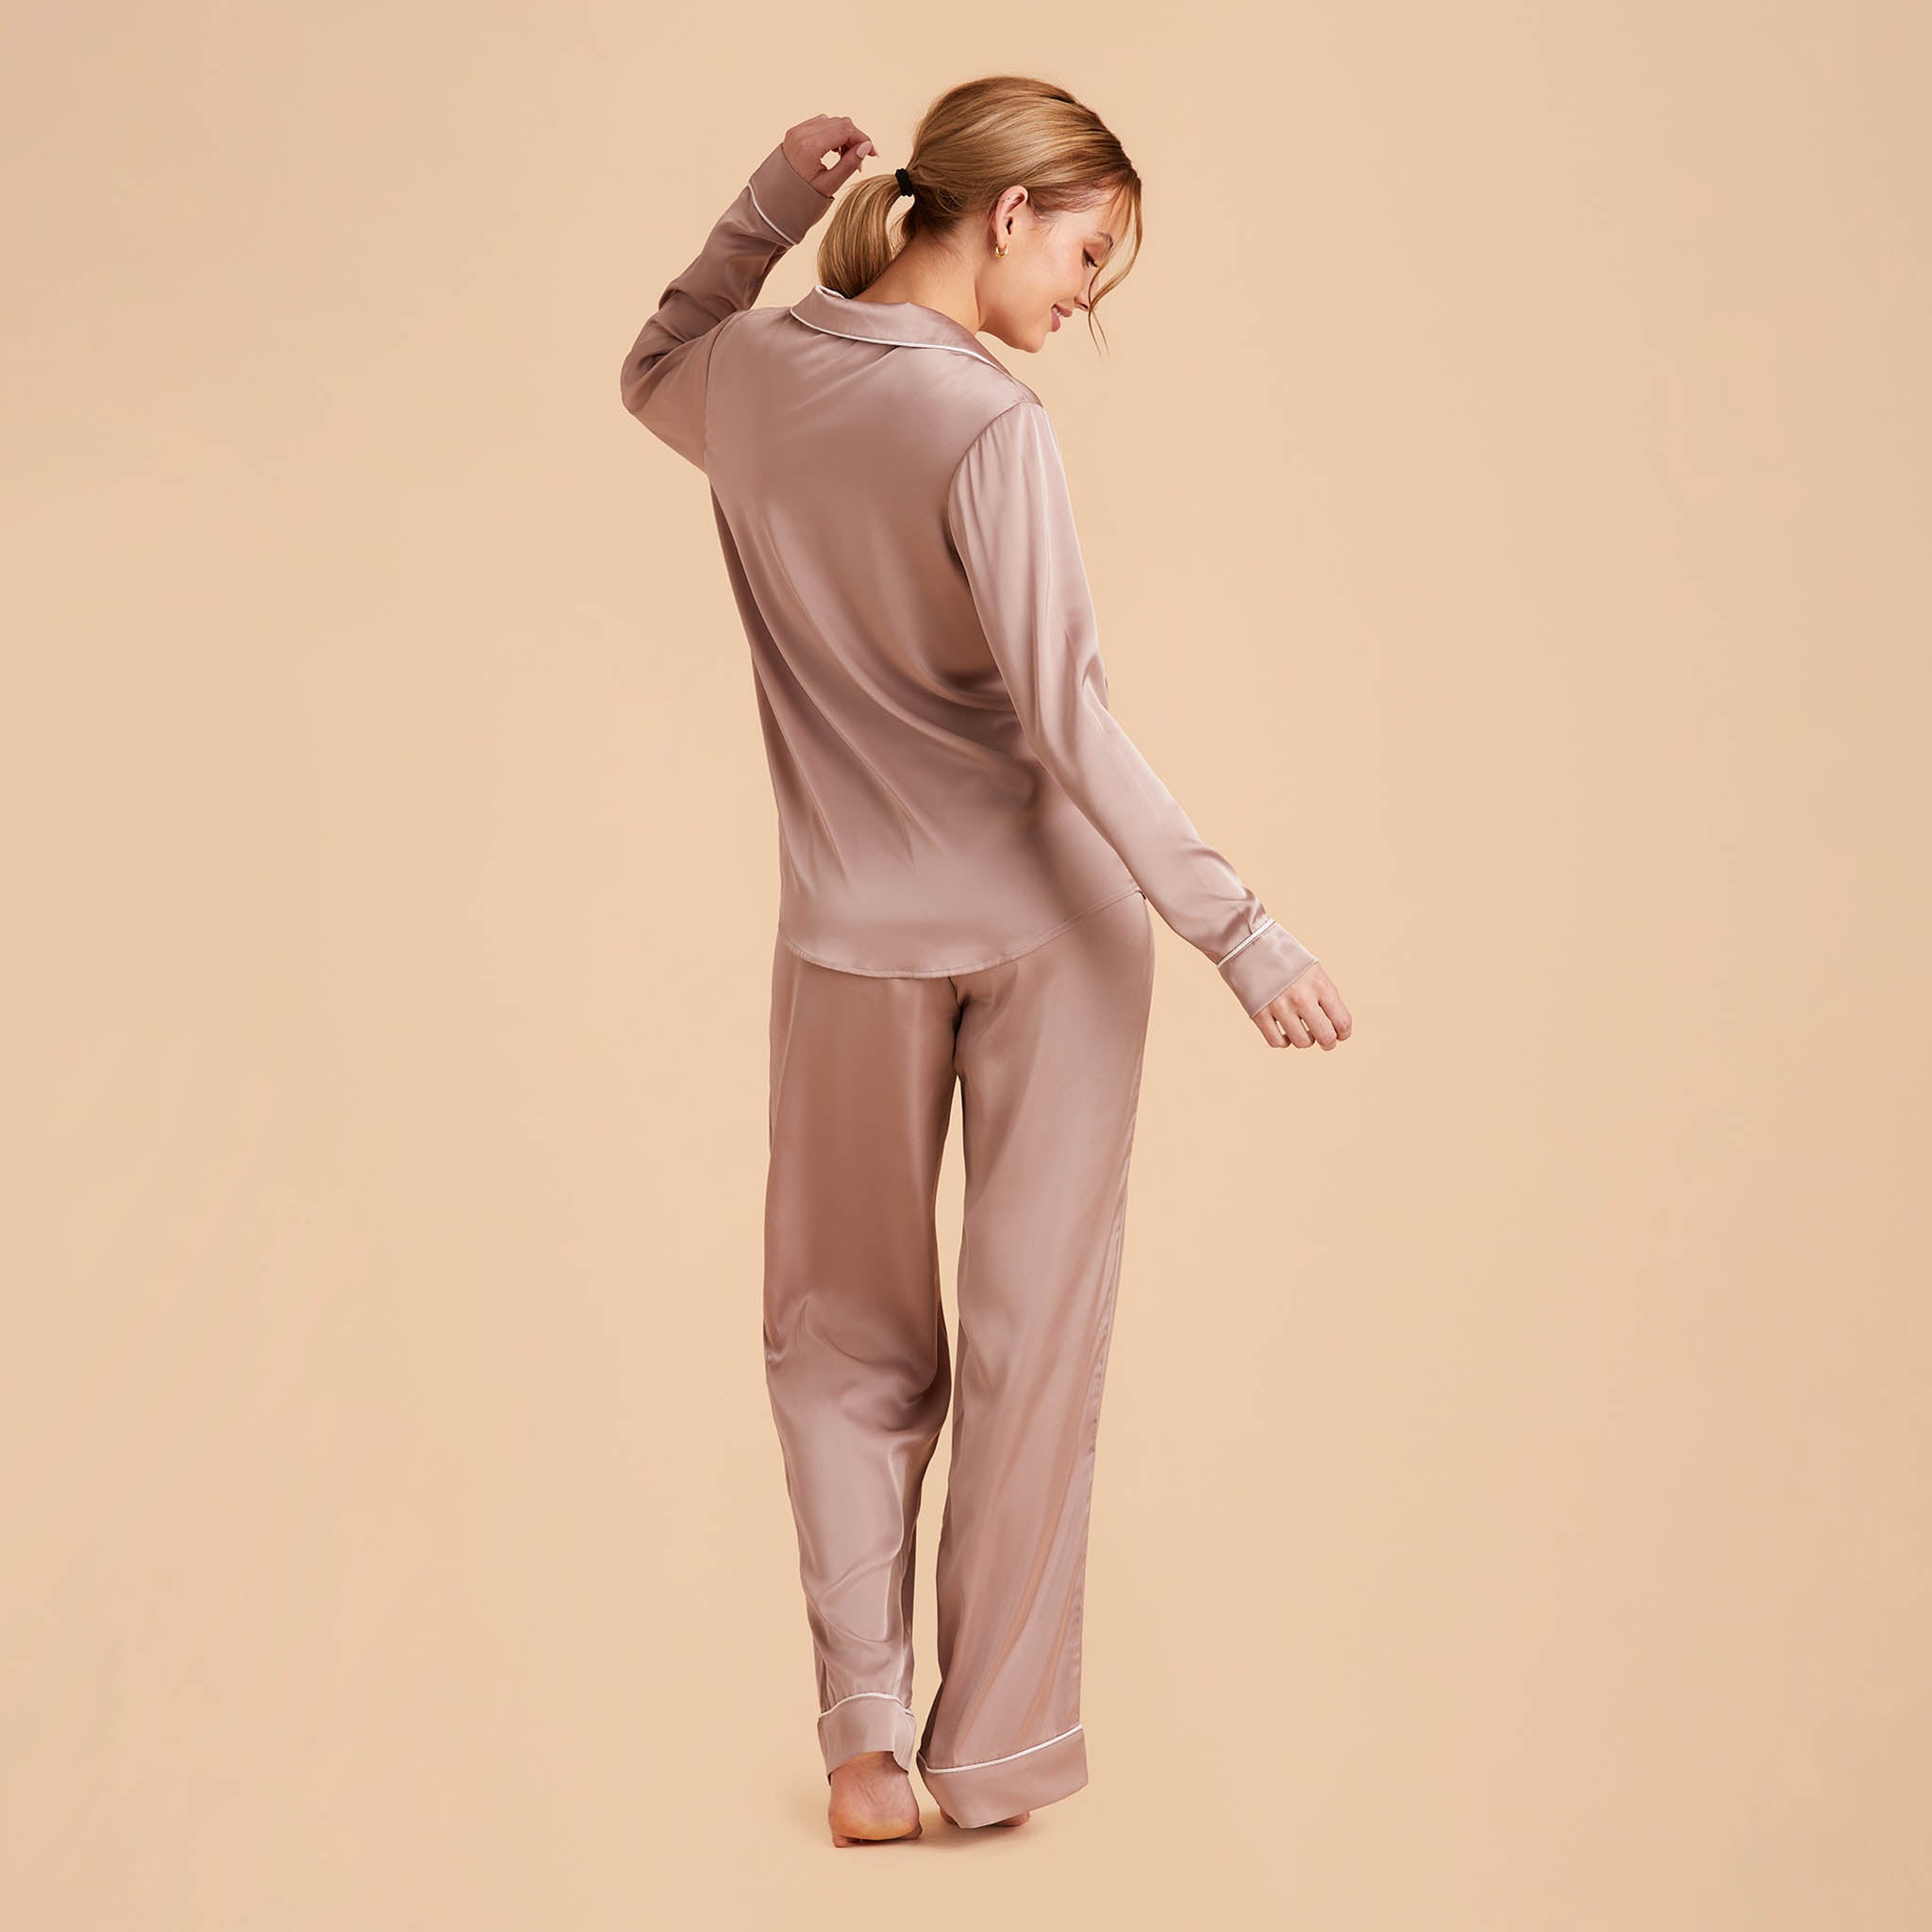 Jonny Satin Long Sleeve Pajama Top With White Piping in mauve taupe, back view